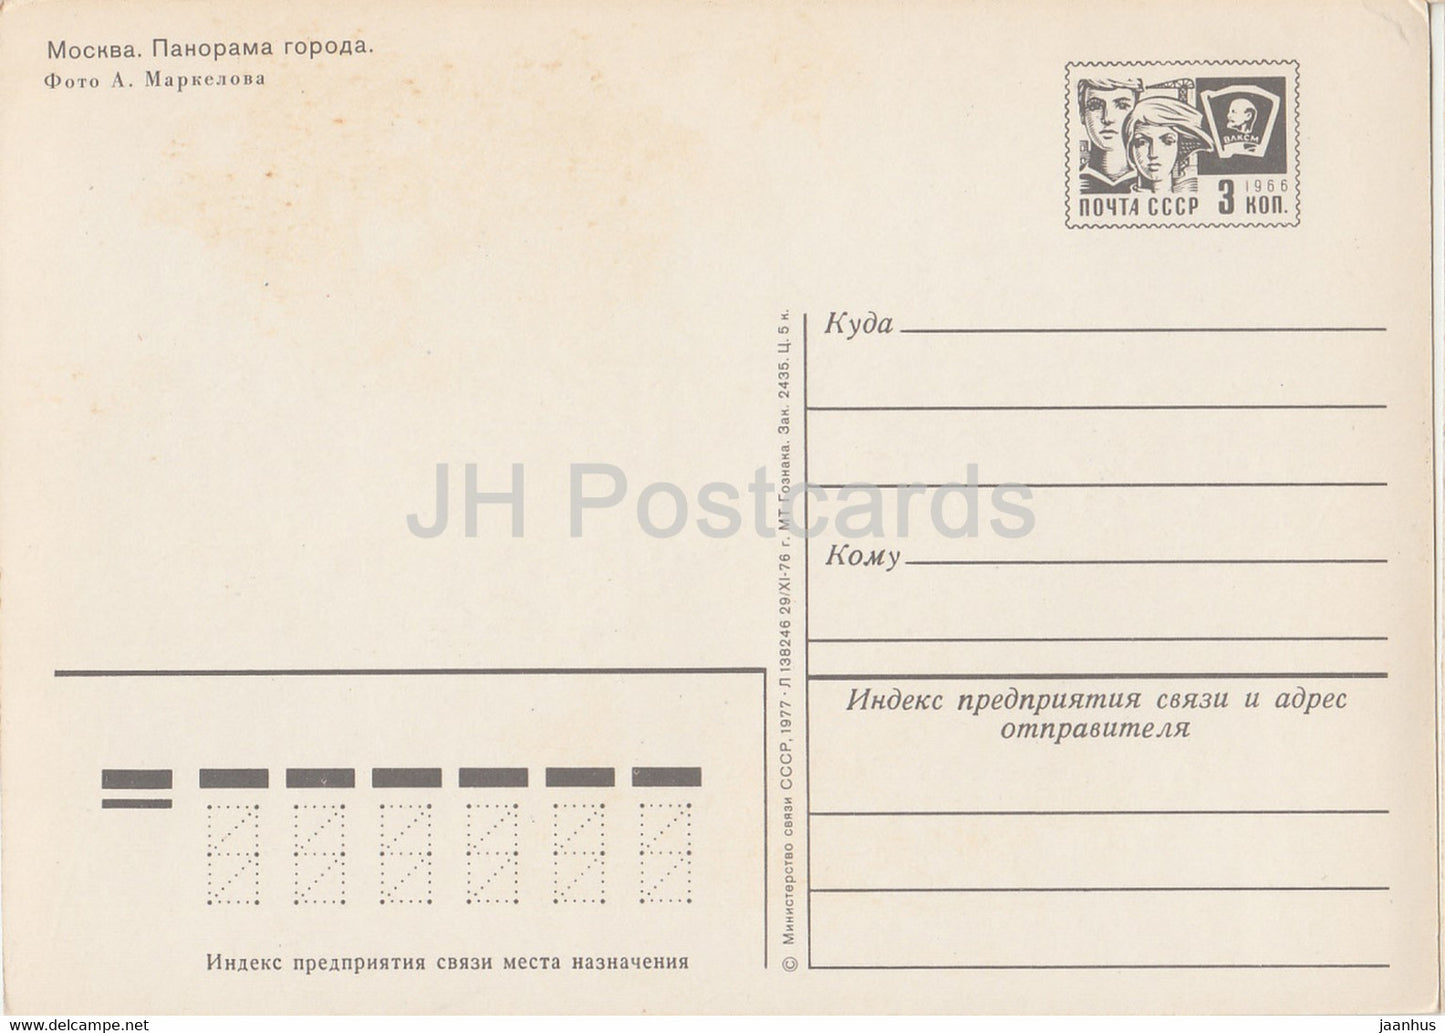 Moscow - City Panorama - postal stationery - 1977 - Russia USSR - unused